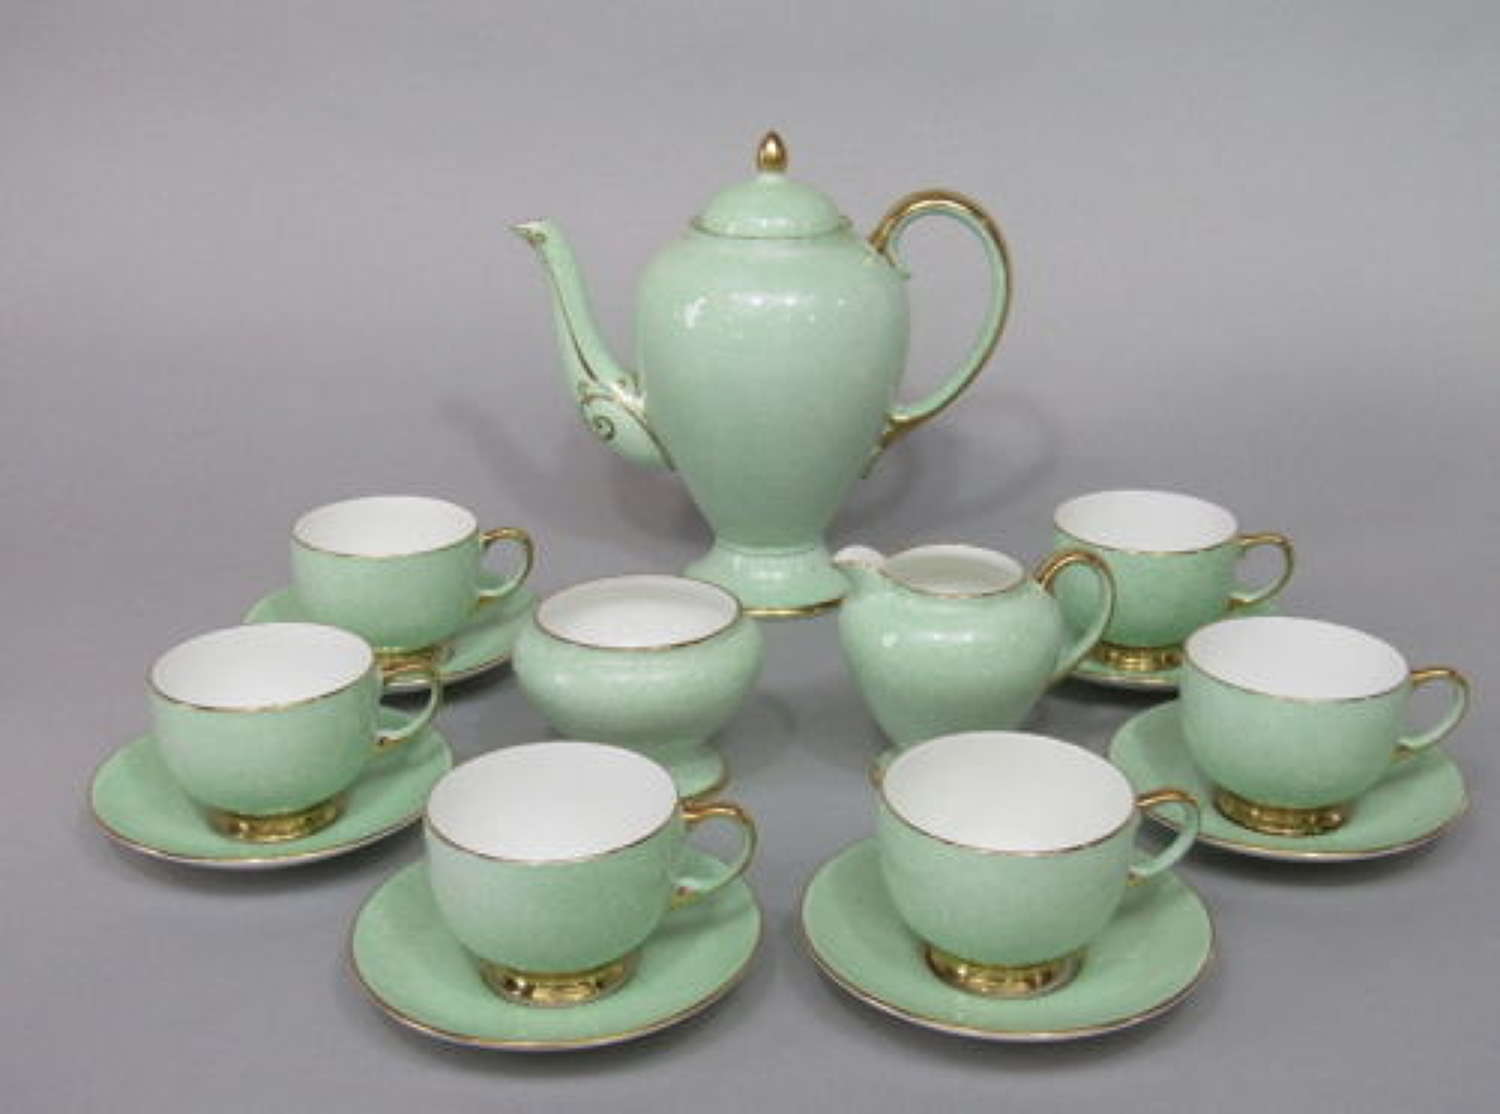 Paragon China Coffee / Tea Wares with Pale Green Speckled Glaze Finish